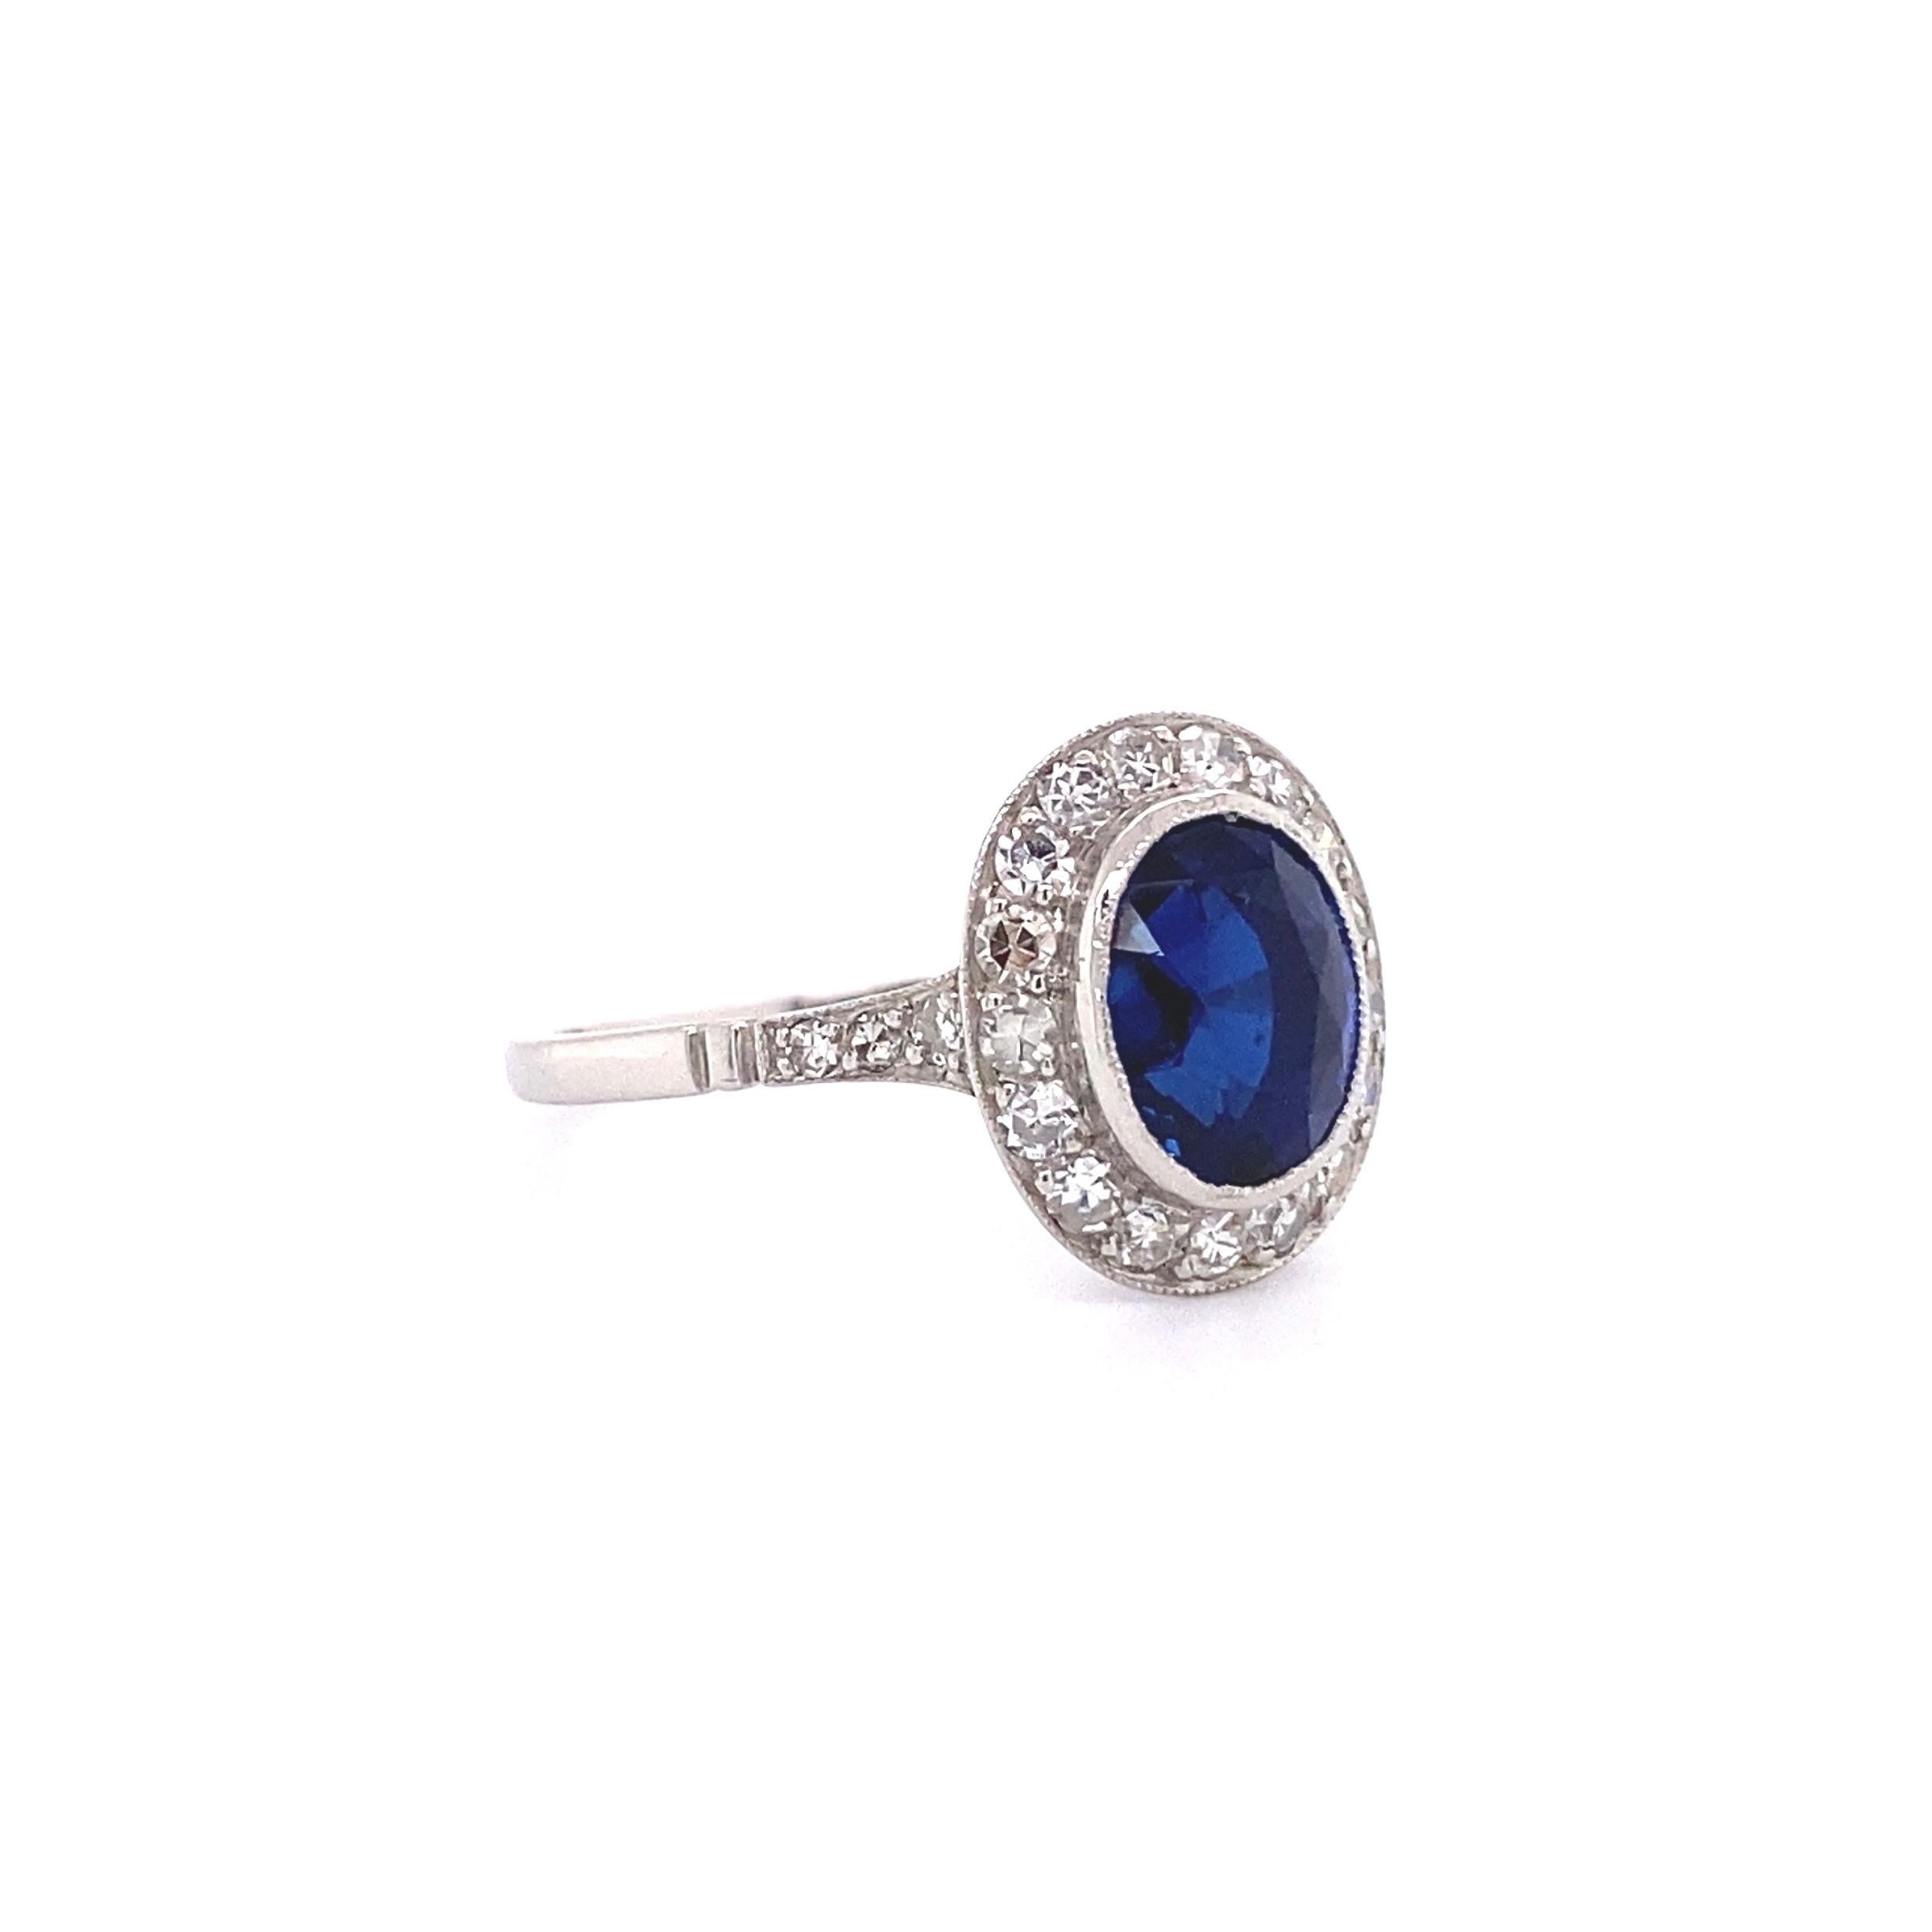 Simply Beautiful! Finely detailed Statement Platinum Show Stopper Ring, center Bezel Hand set with a securely nestled 2.51 Carat oval Blue Sapphire with no indications of heat treatment, surrounded by and enhanced on shank with Hand set pave